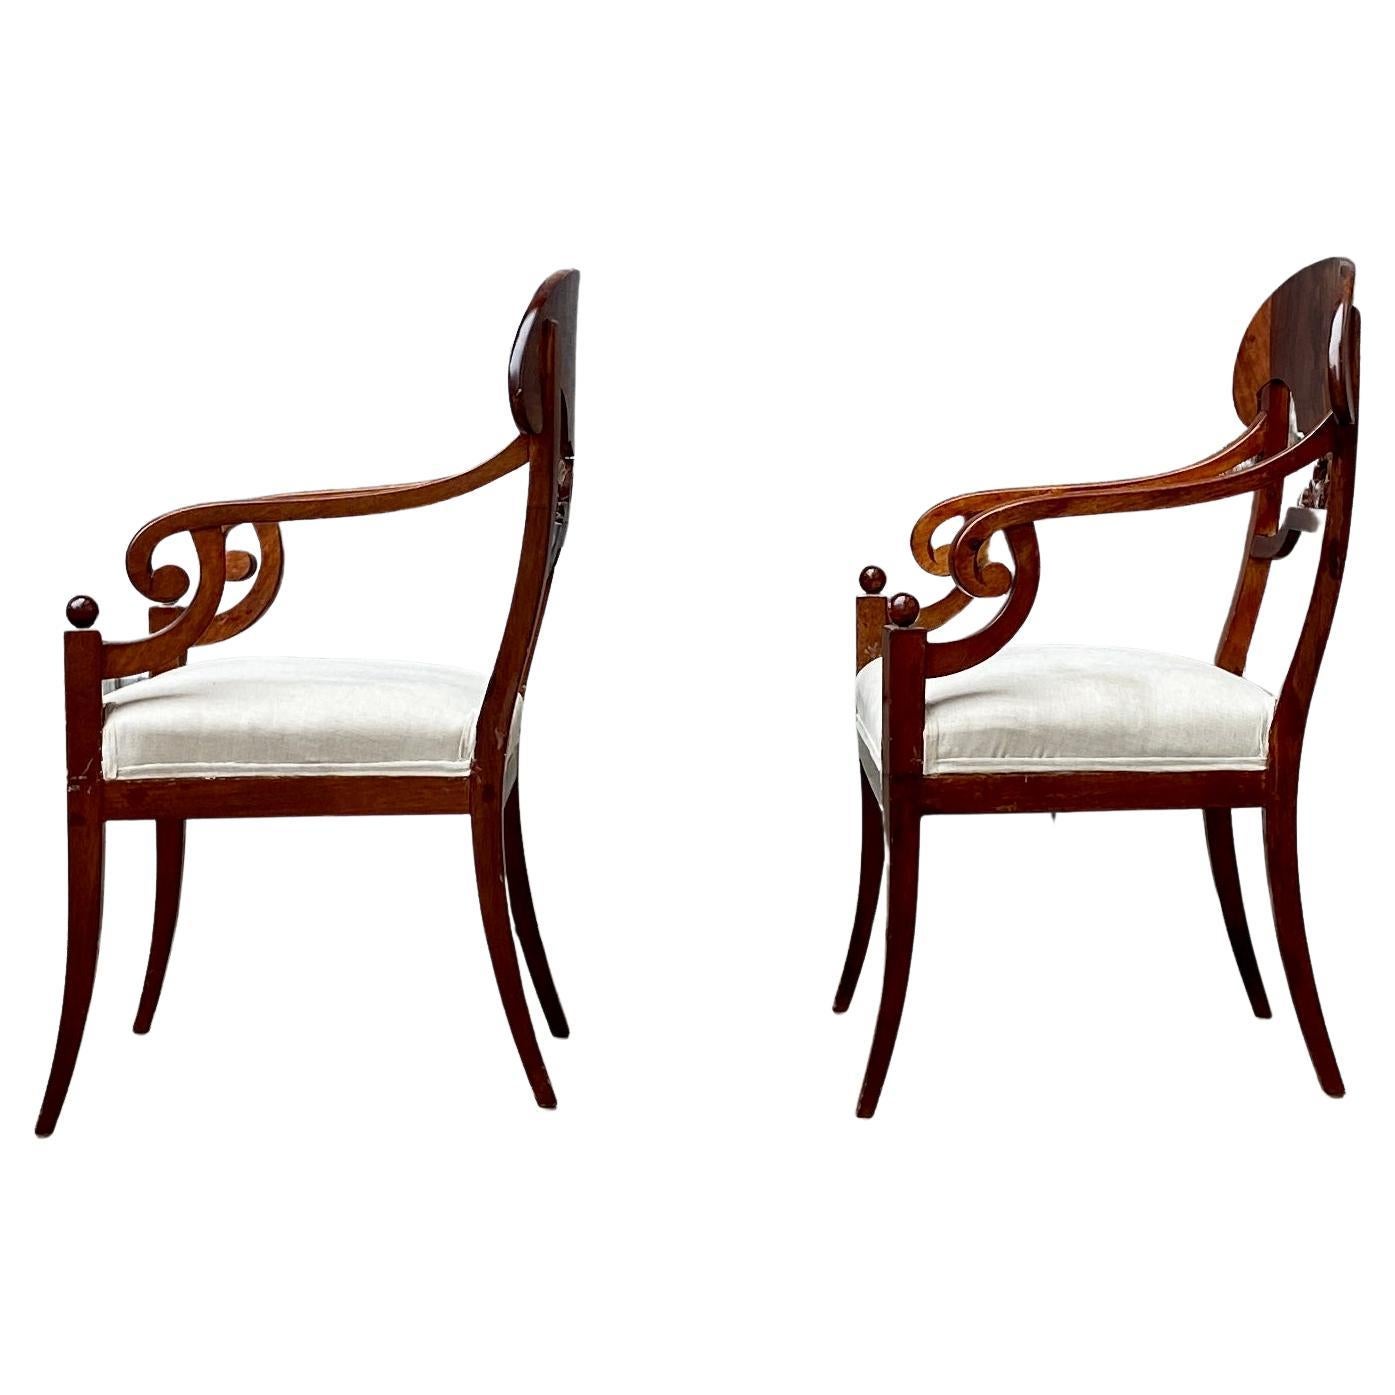 Gustavian Pair of Swedish Empire Mahogany Armchairs 19th Century Sweden For Sale